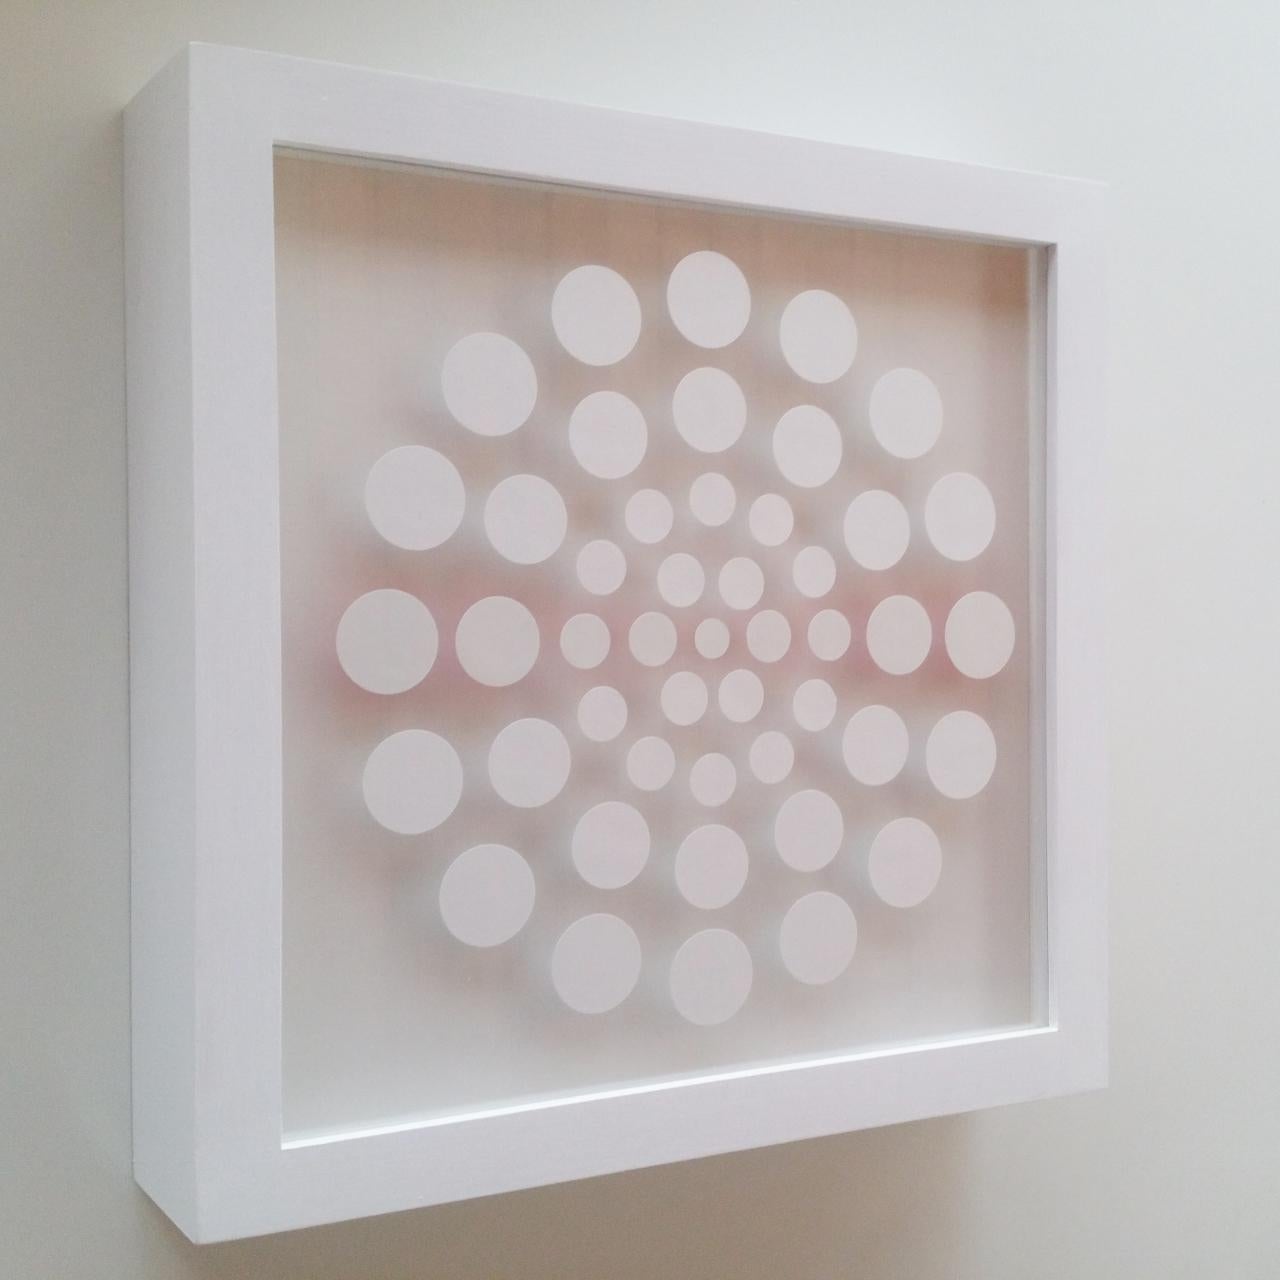 47 Dots VIII - contemporary modern abstract geometric paper relief - Contemporary Painting by Eliza Kopec